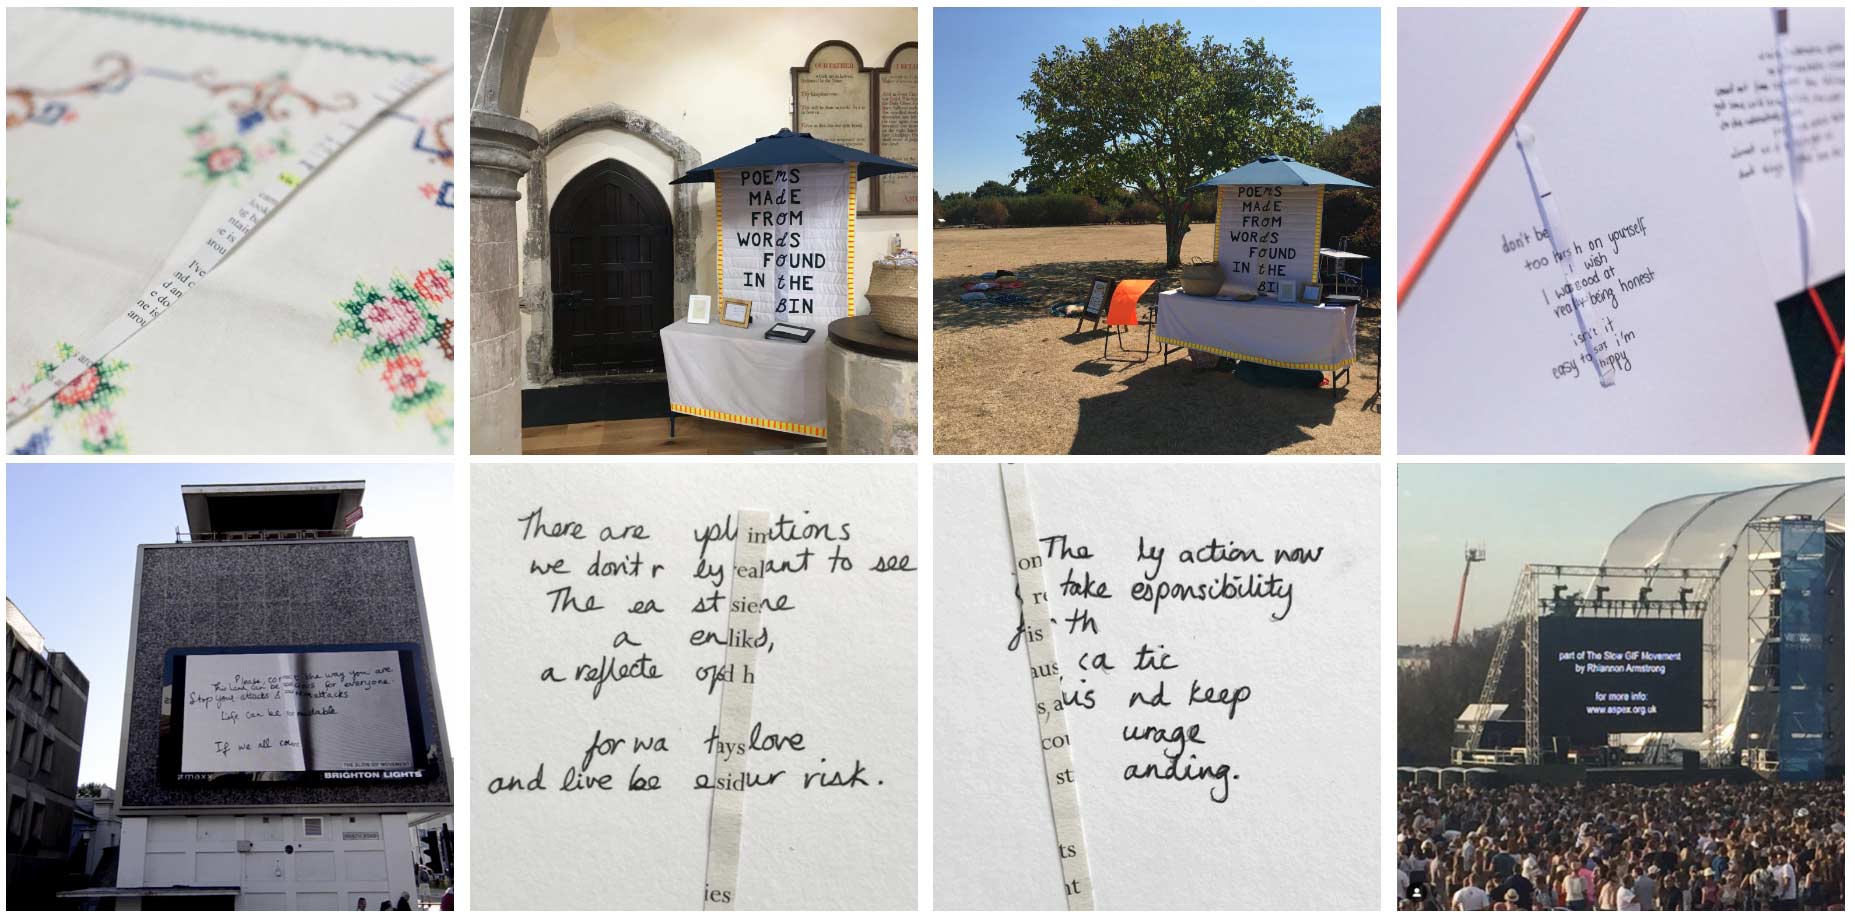 Six square images of poetry made from shredded documents displayed on outdoor screens, billboards, a tablecloth and close ups of the poems on white paper.